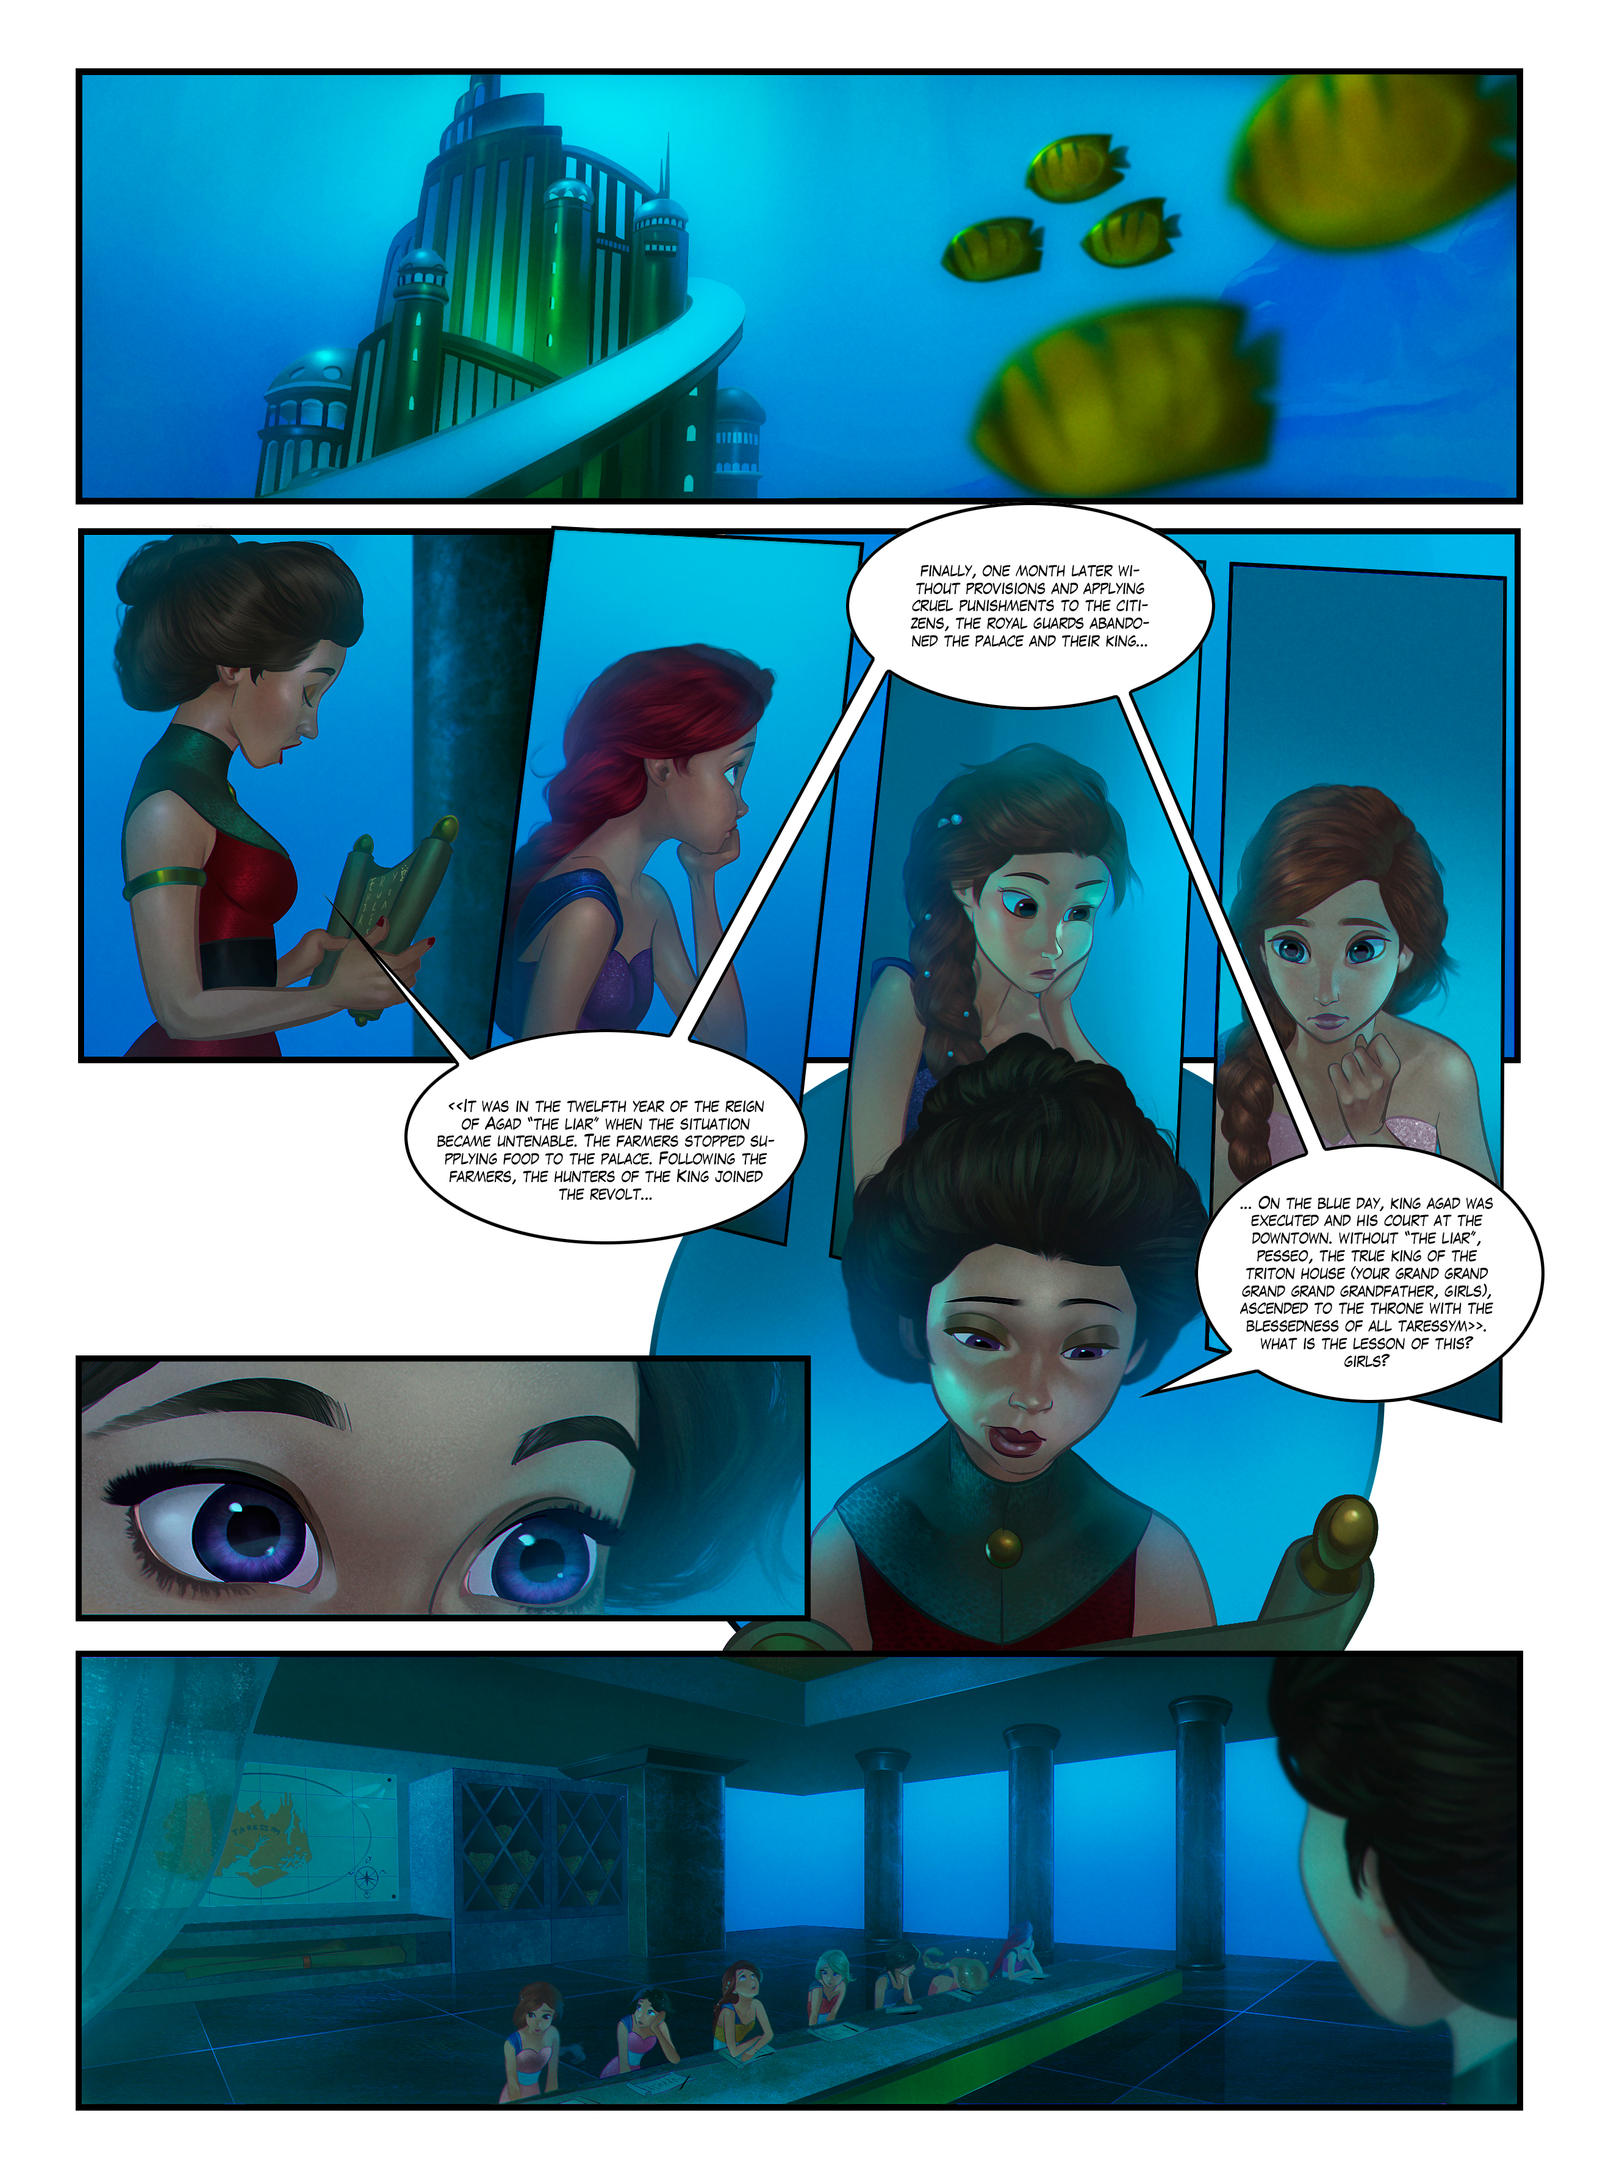 The Little Mermaid comic, page 13